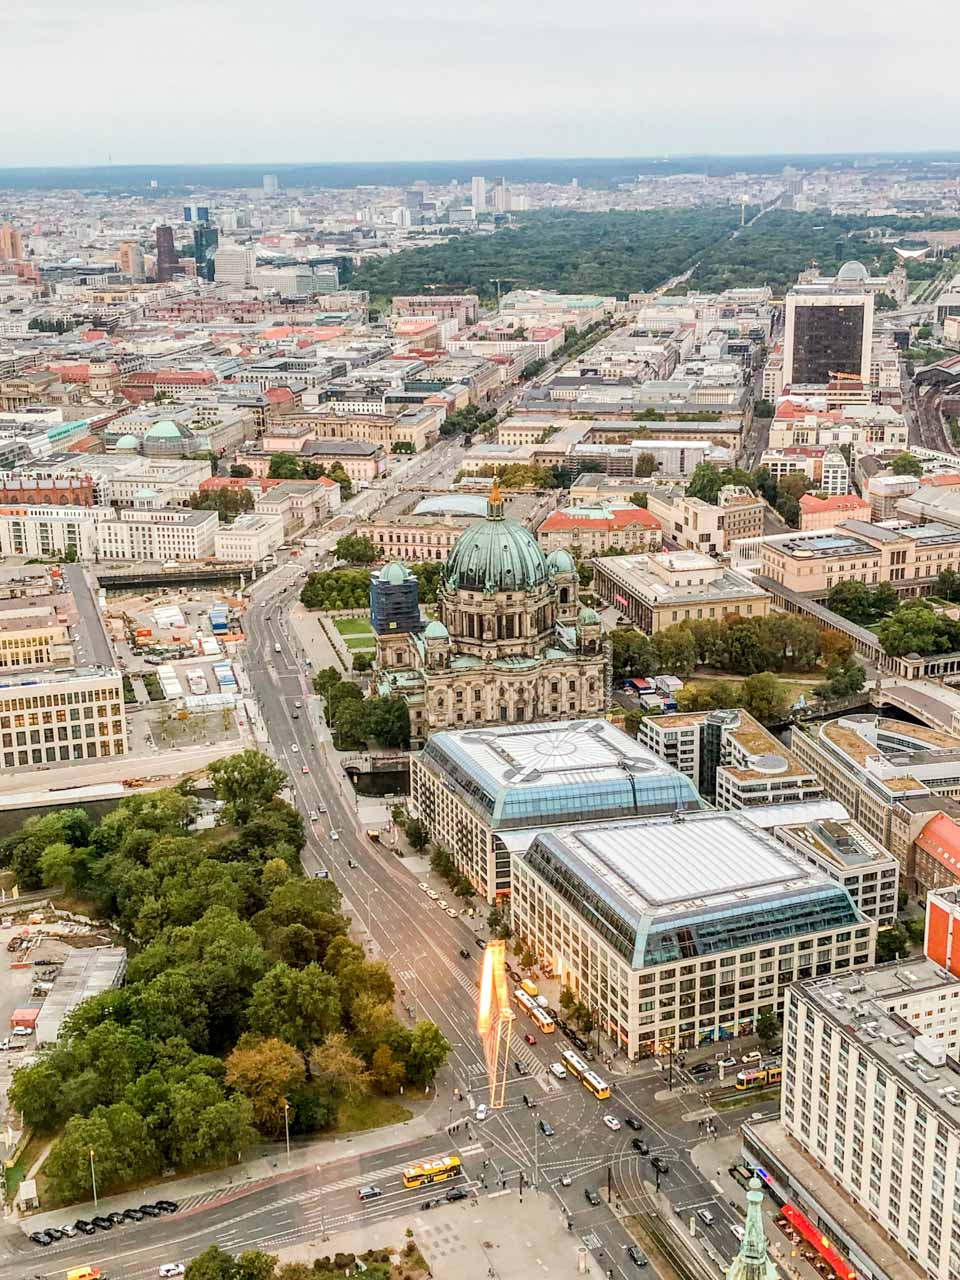 The panorama of Berlin seen from the observation deck at the Berlin TV Tower